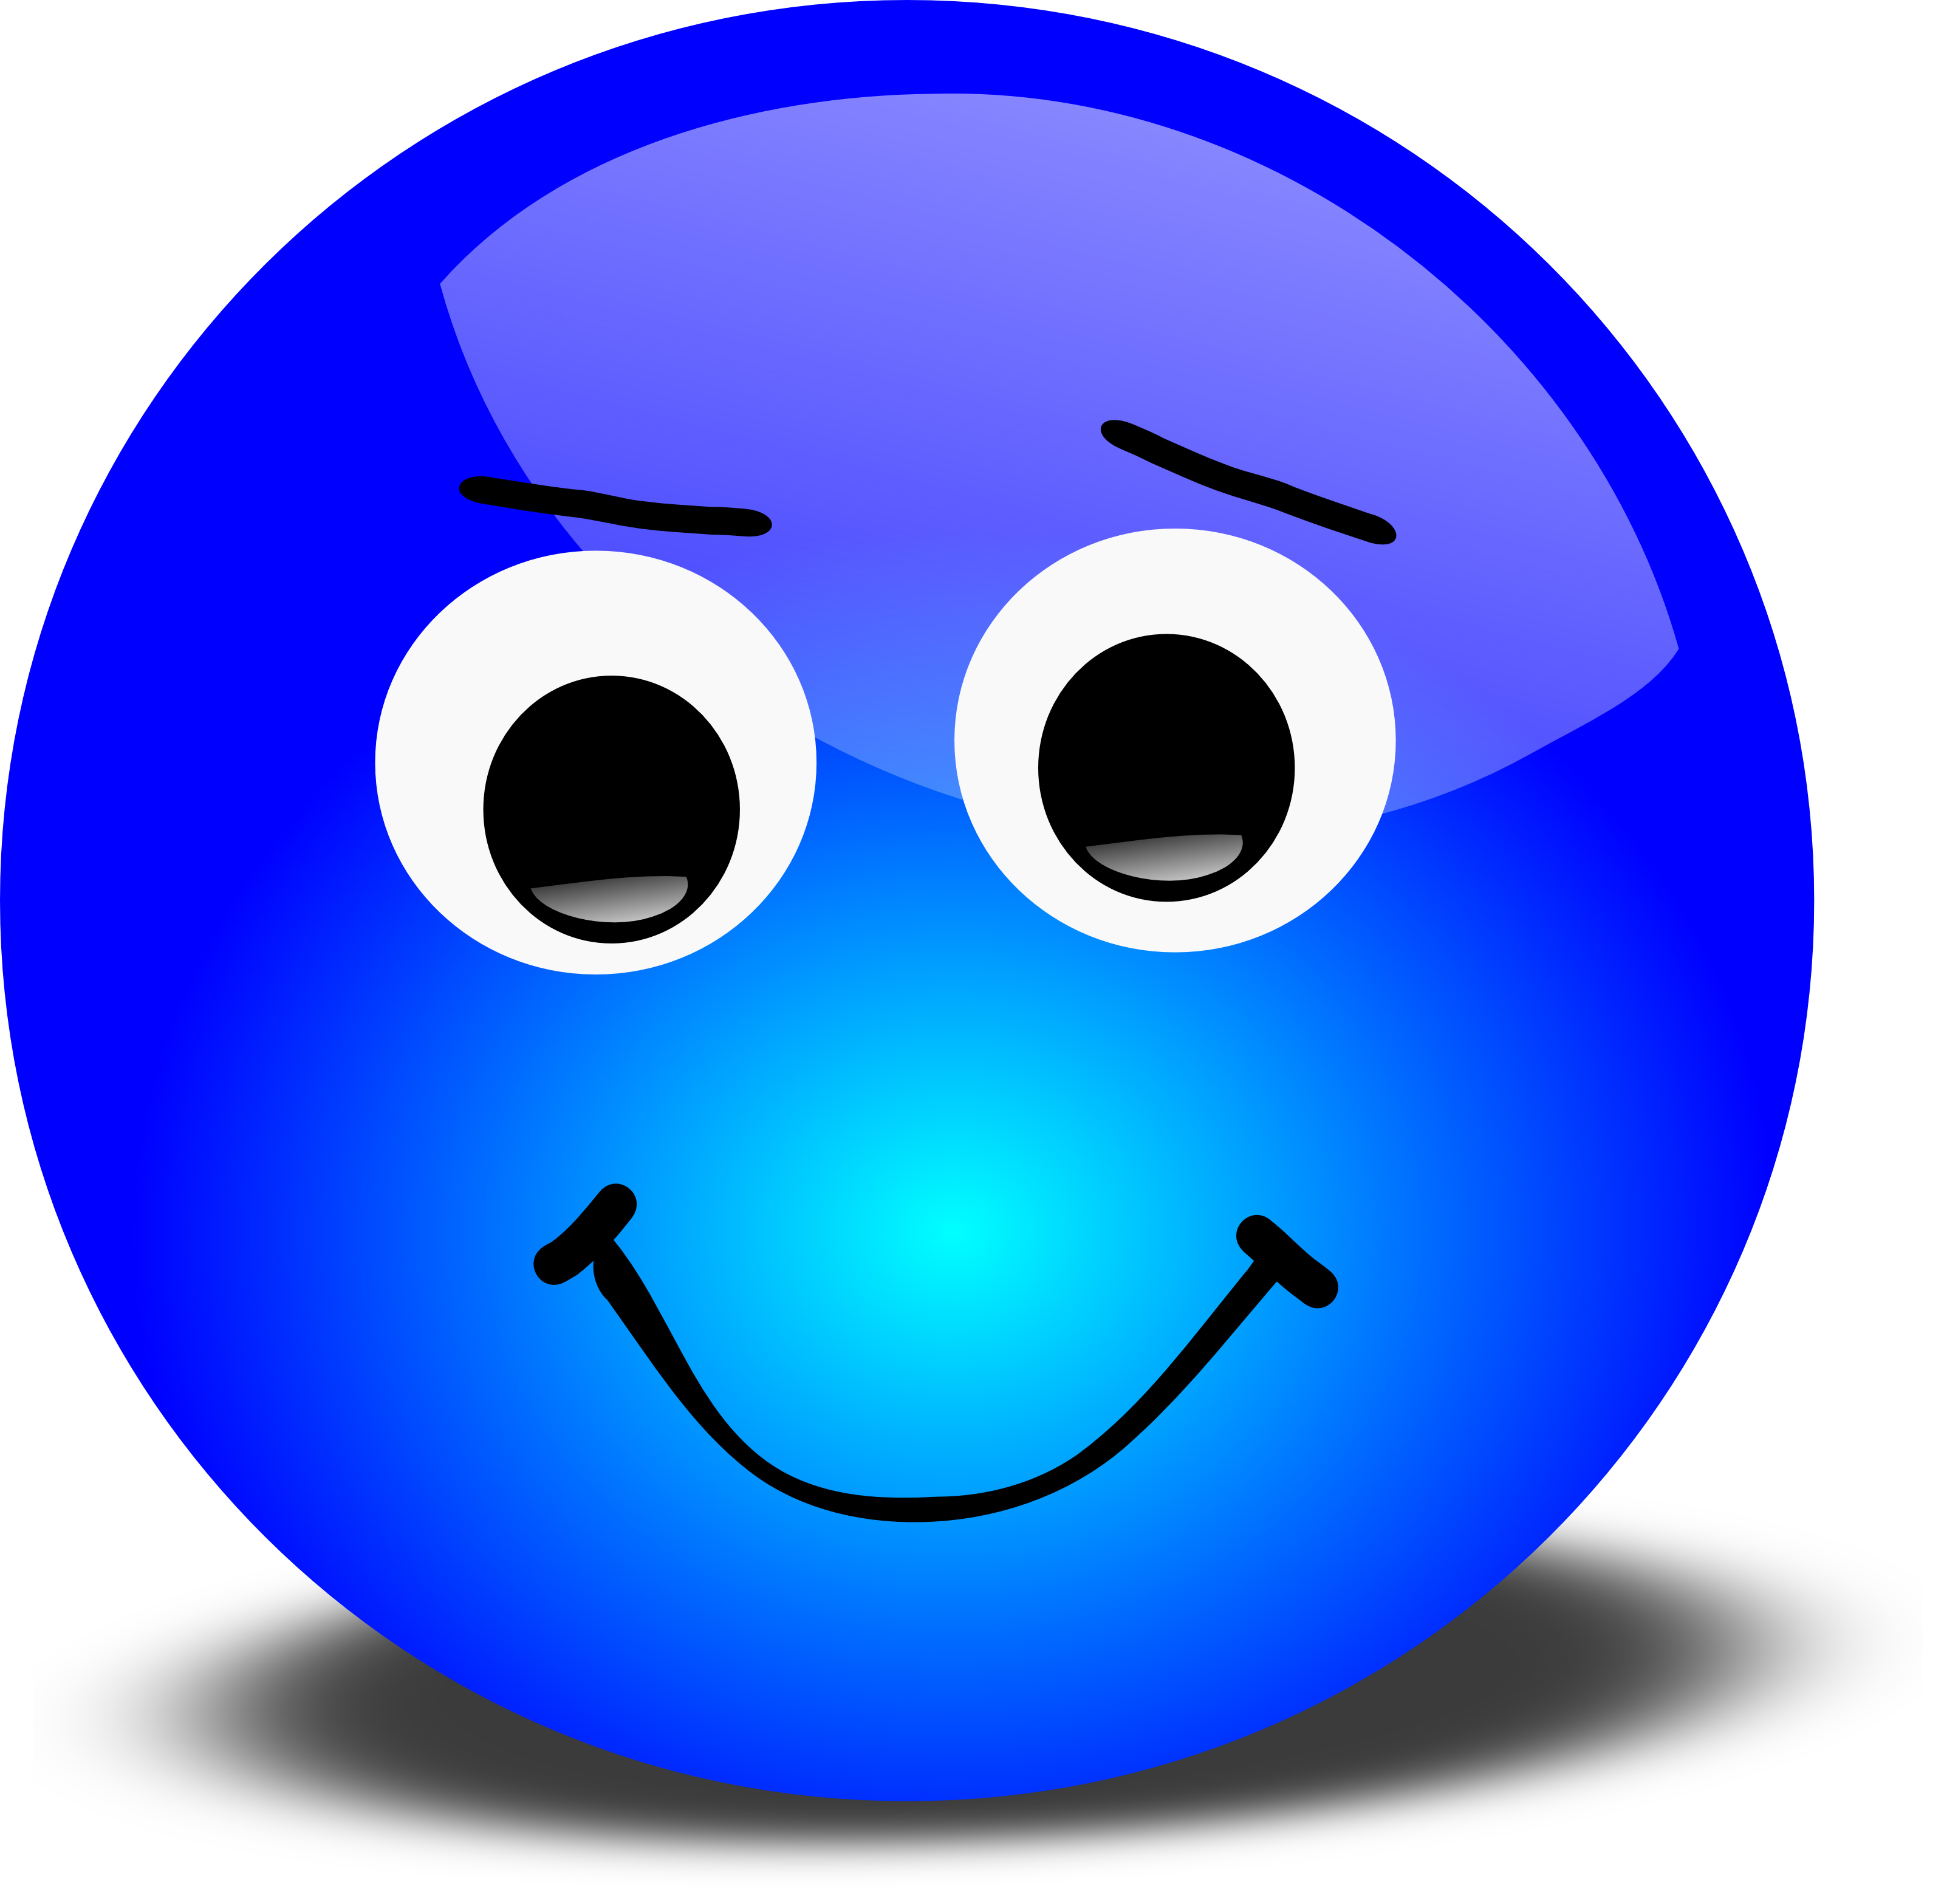 free clipart images smiley faces - photo #24